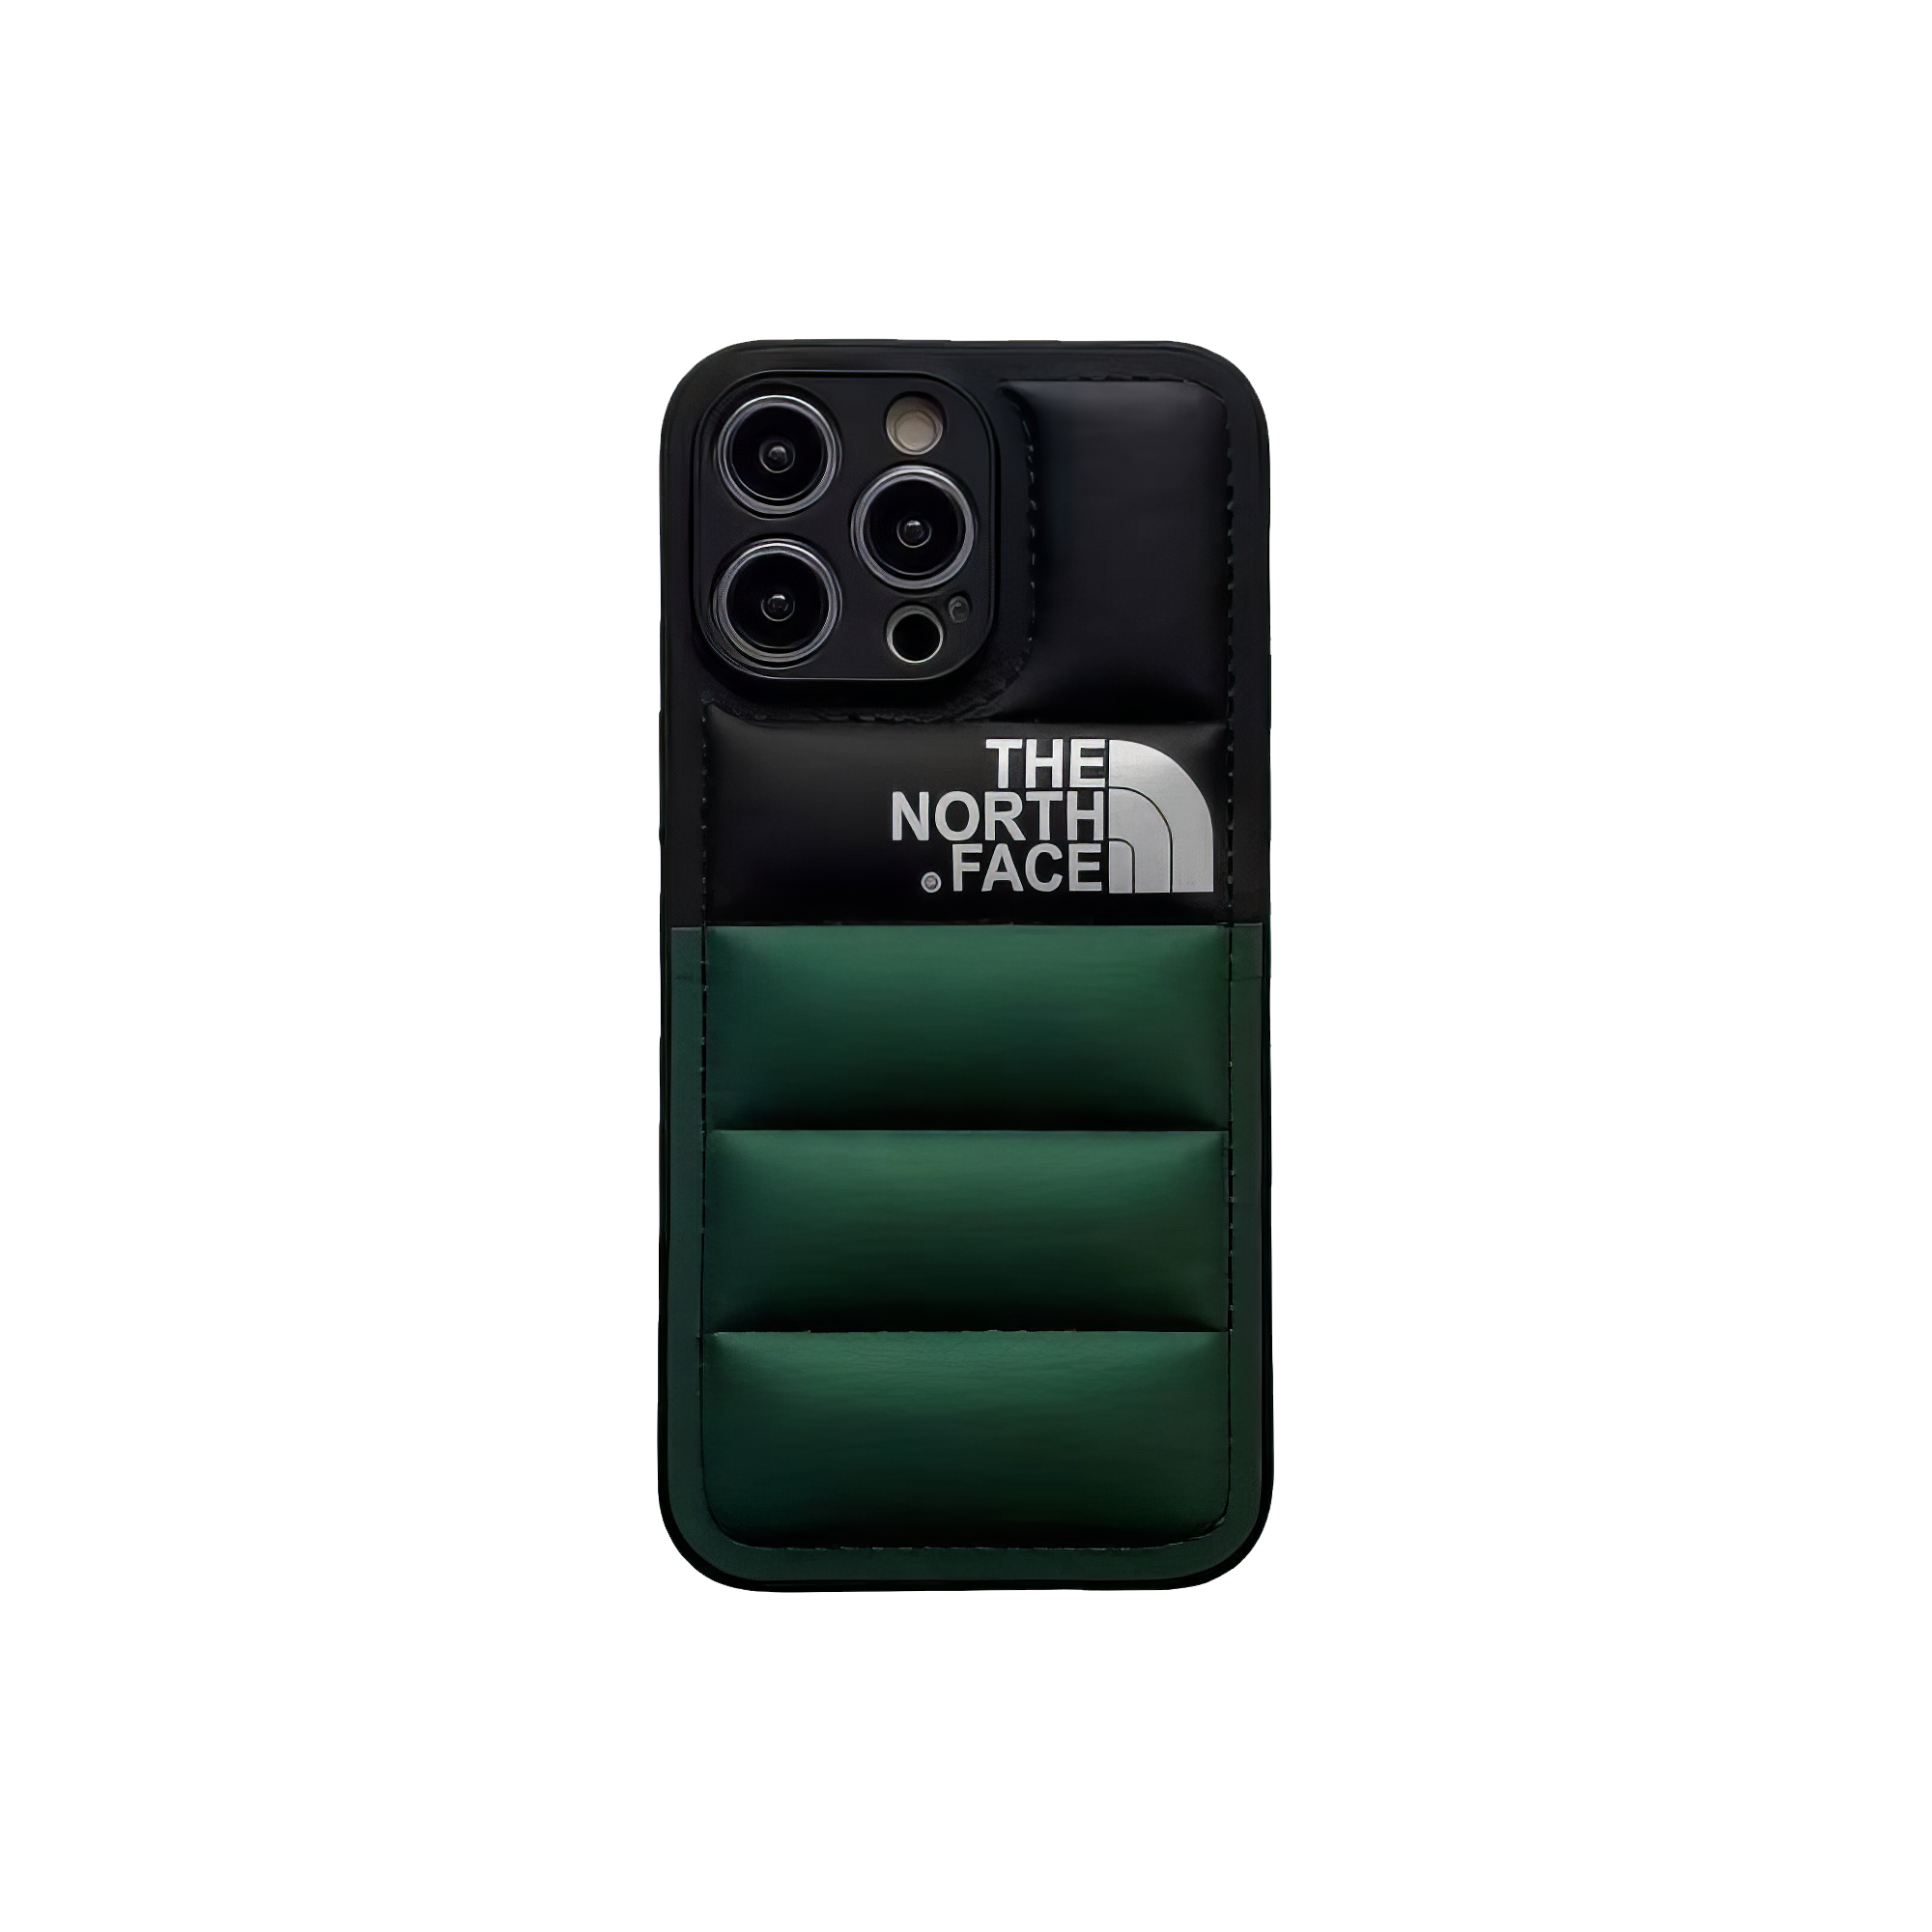 The North Face half dark green and black smartphone case, for a sophisticated outdoor vibe.